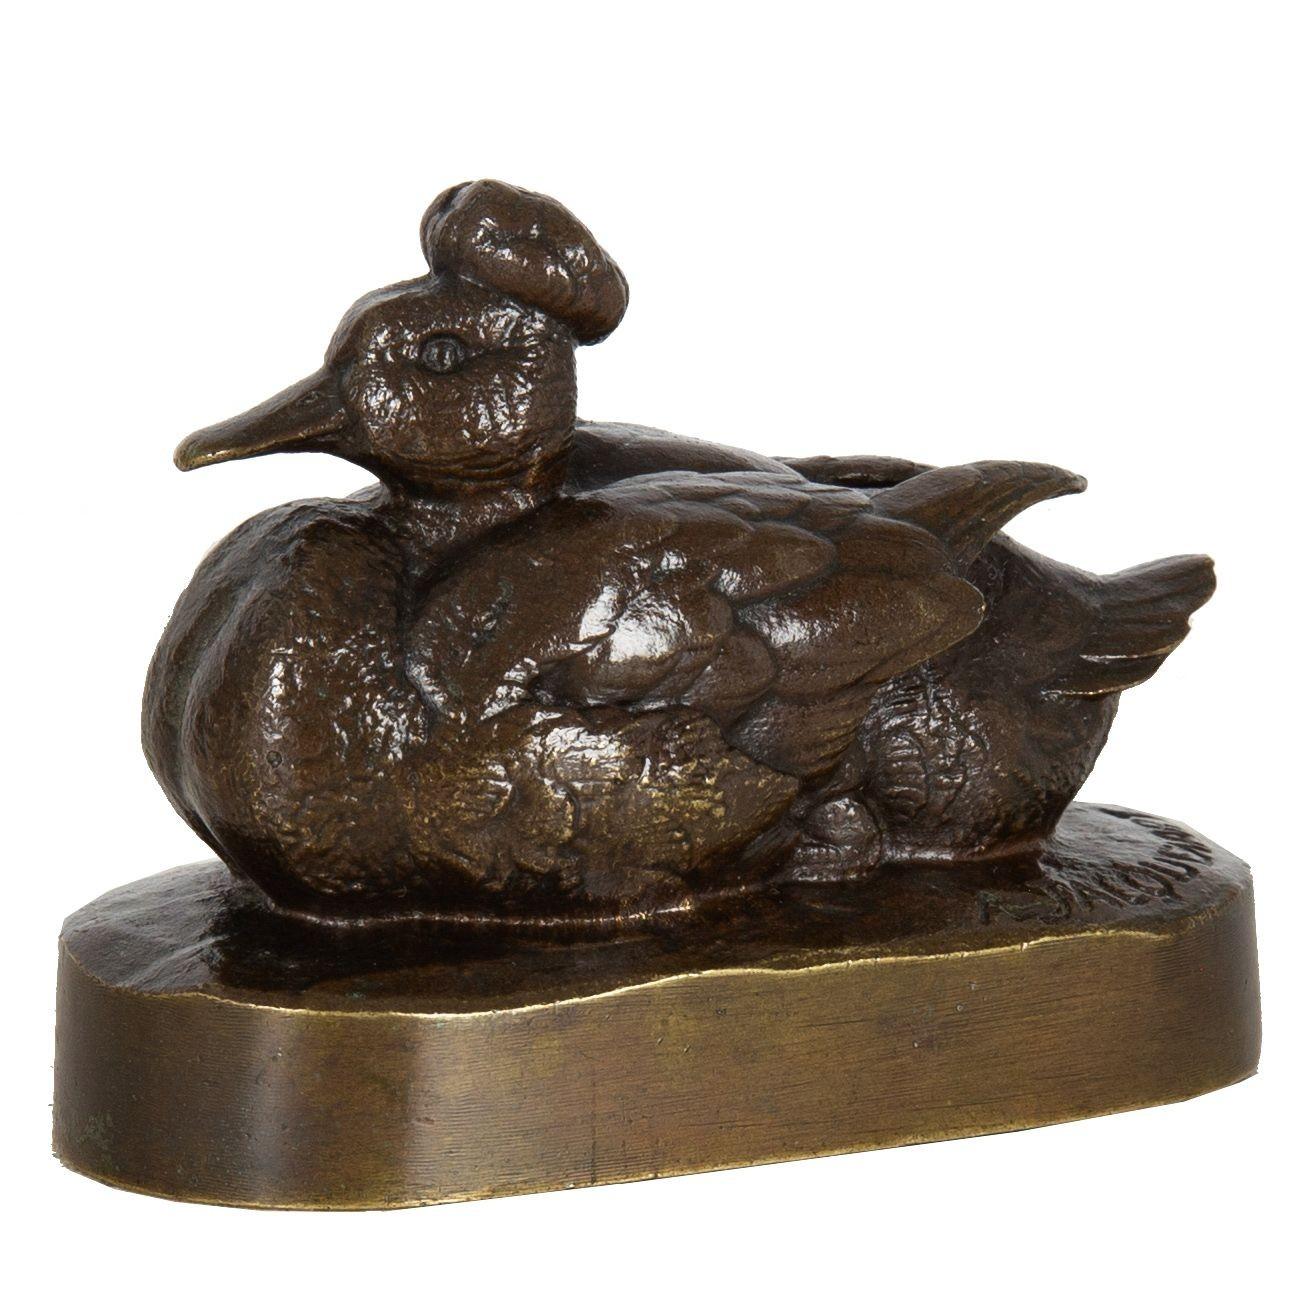 Rare French Bronze Sculpture “Crested Duck” by Henri Alfred Jacquemart In Good Condition For Sale In Shippensburg, PA